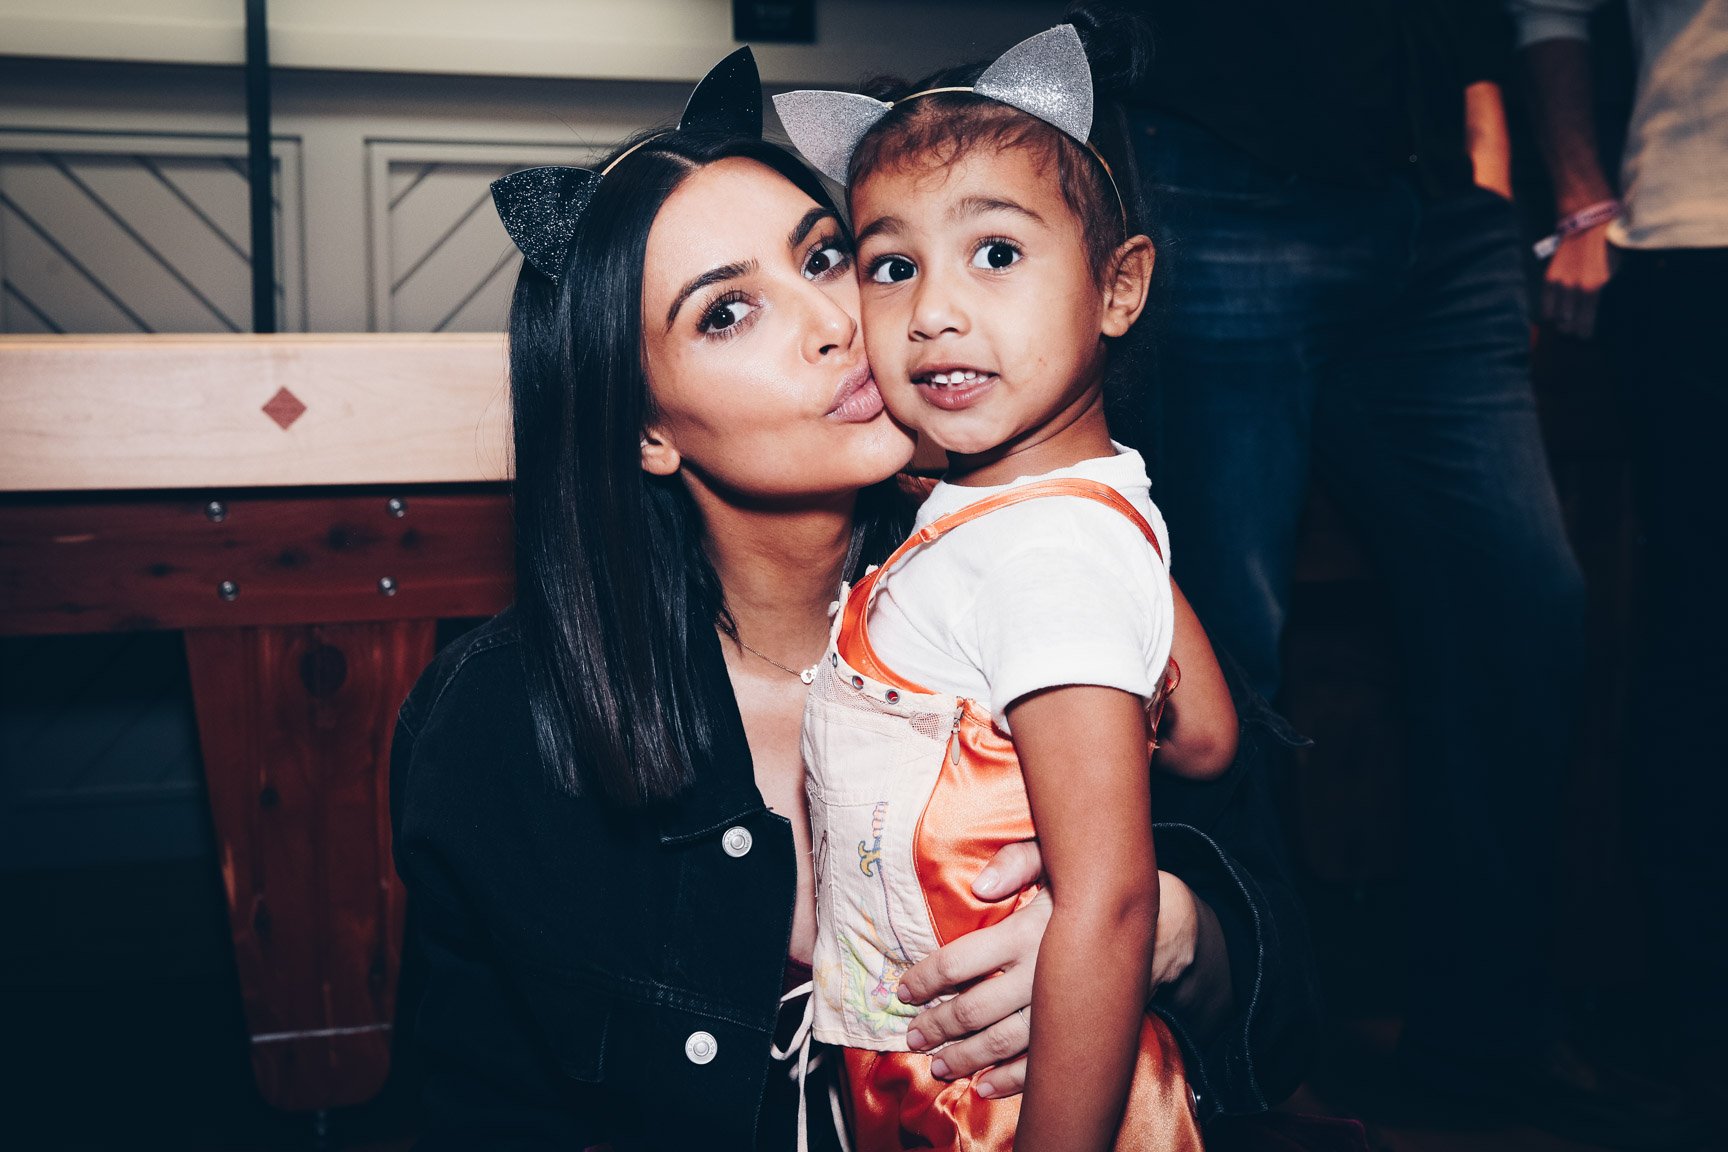 Kim Kardashian And North West at Ariana Grande's "Dangerous Woman" concert at The Forum on March 31, 2017 in Inglewood, California. | Source: Getty Images